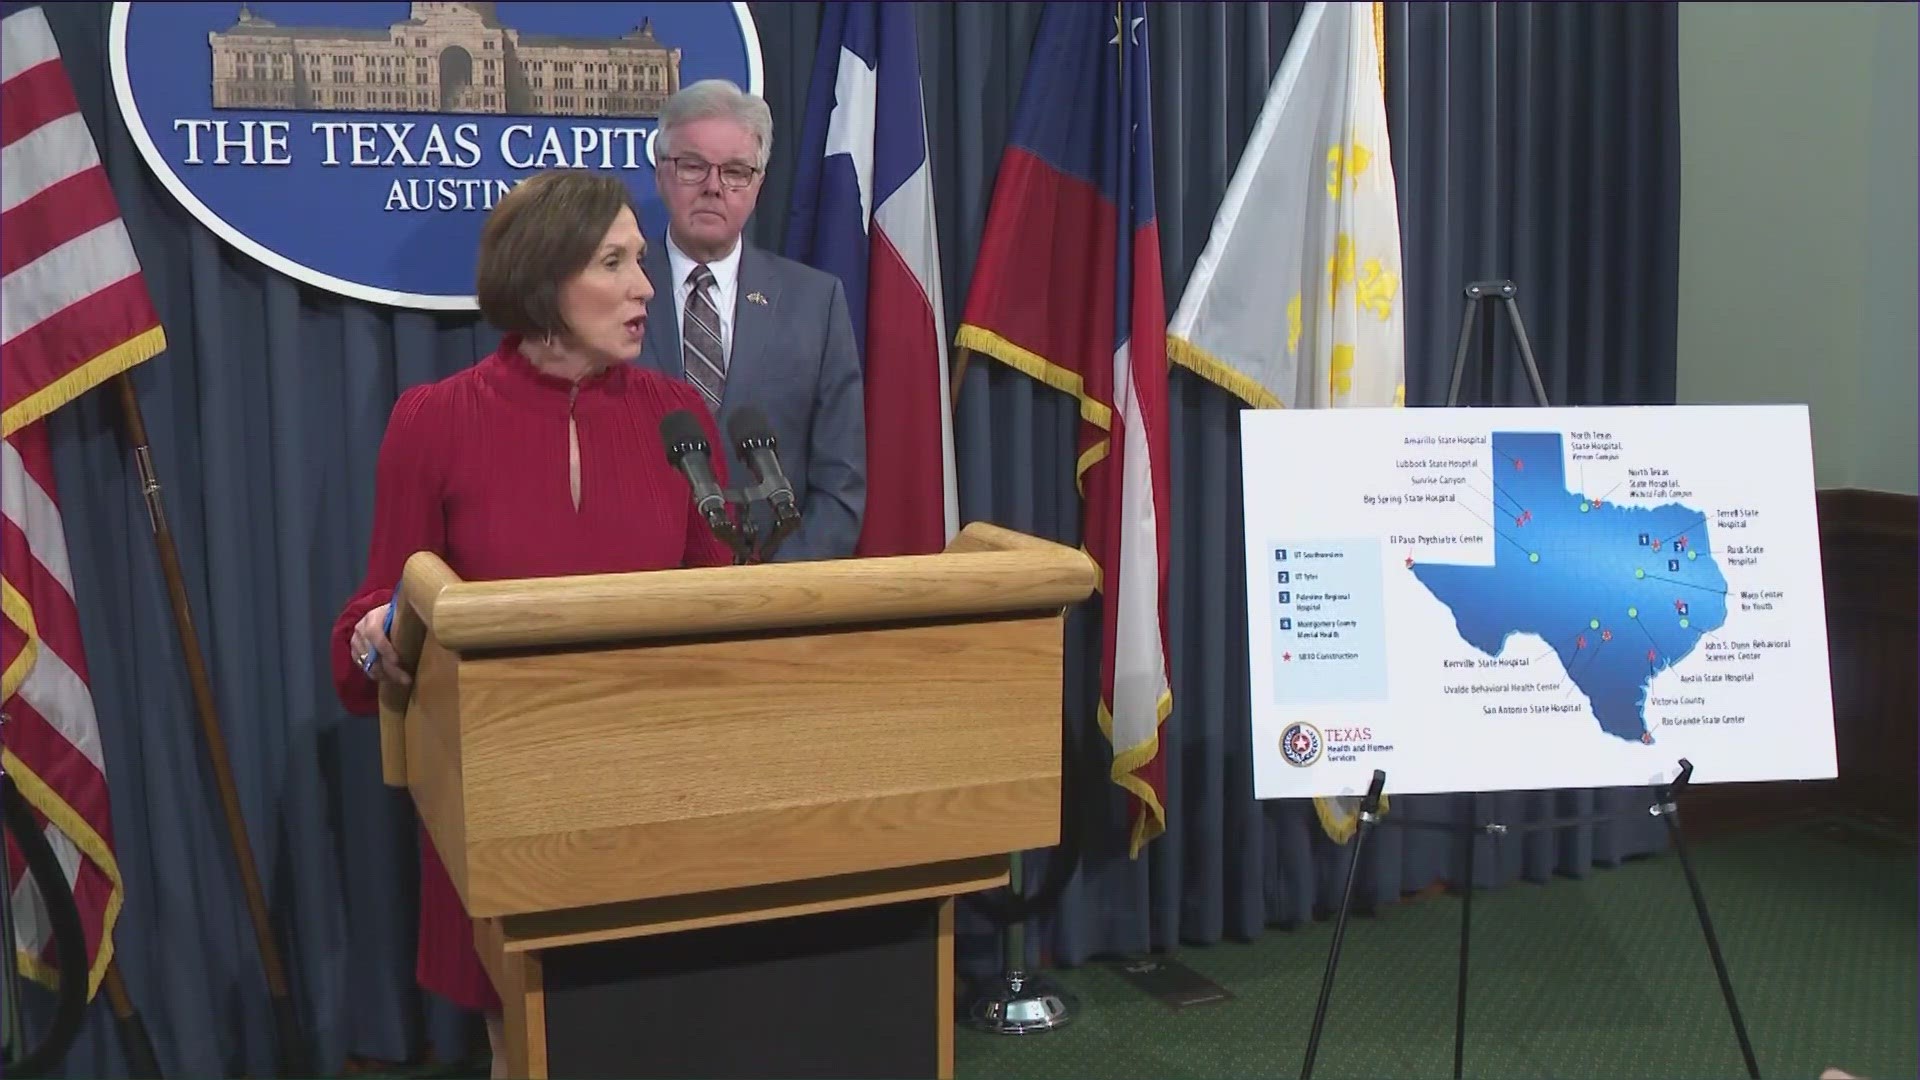 A bill that would expand mental health services in rural parts of Texas is heading to the House. The Senate passed SB 26 Thursday afternoon.